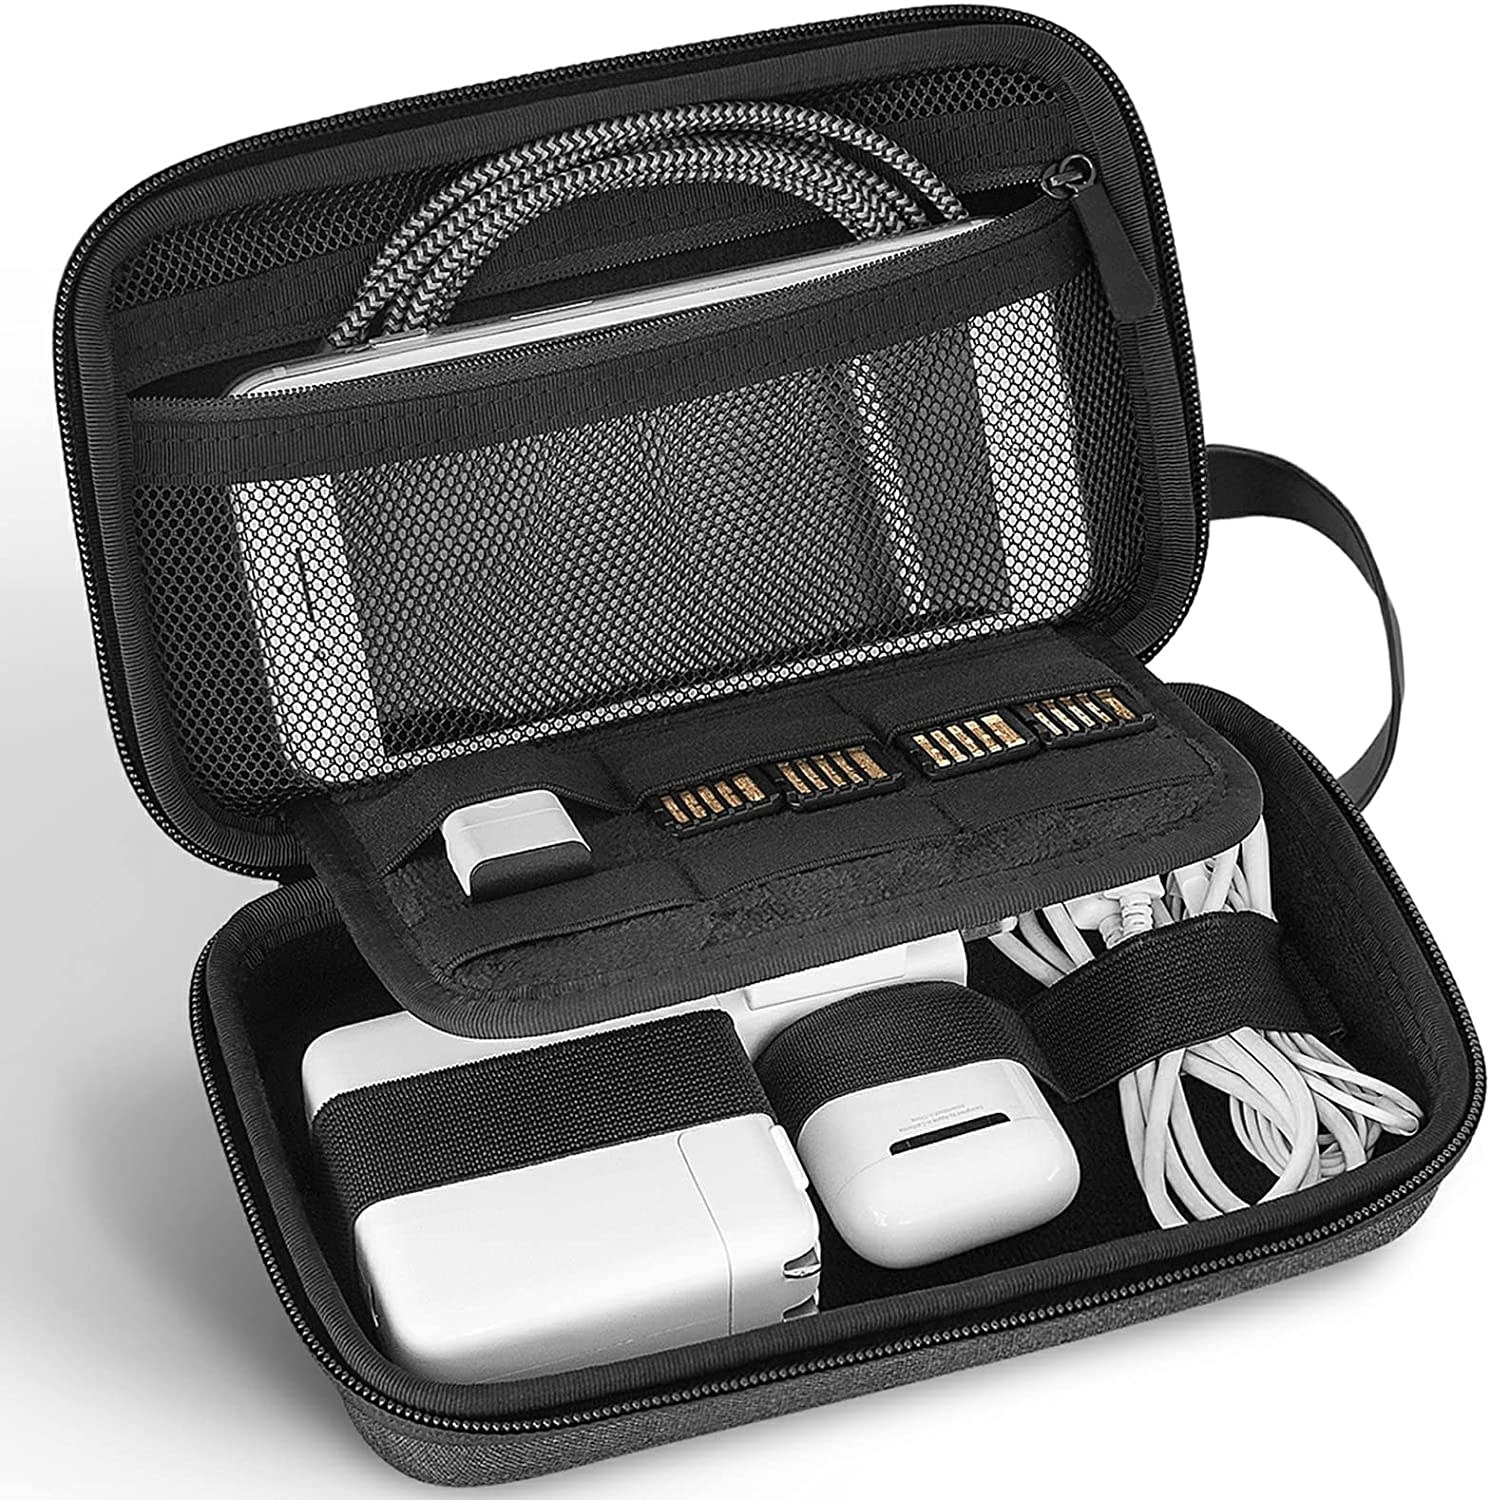 the open hard shell case showing chargers and cords neatly arranged inside